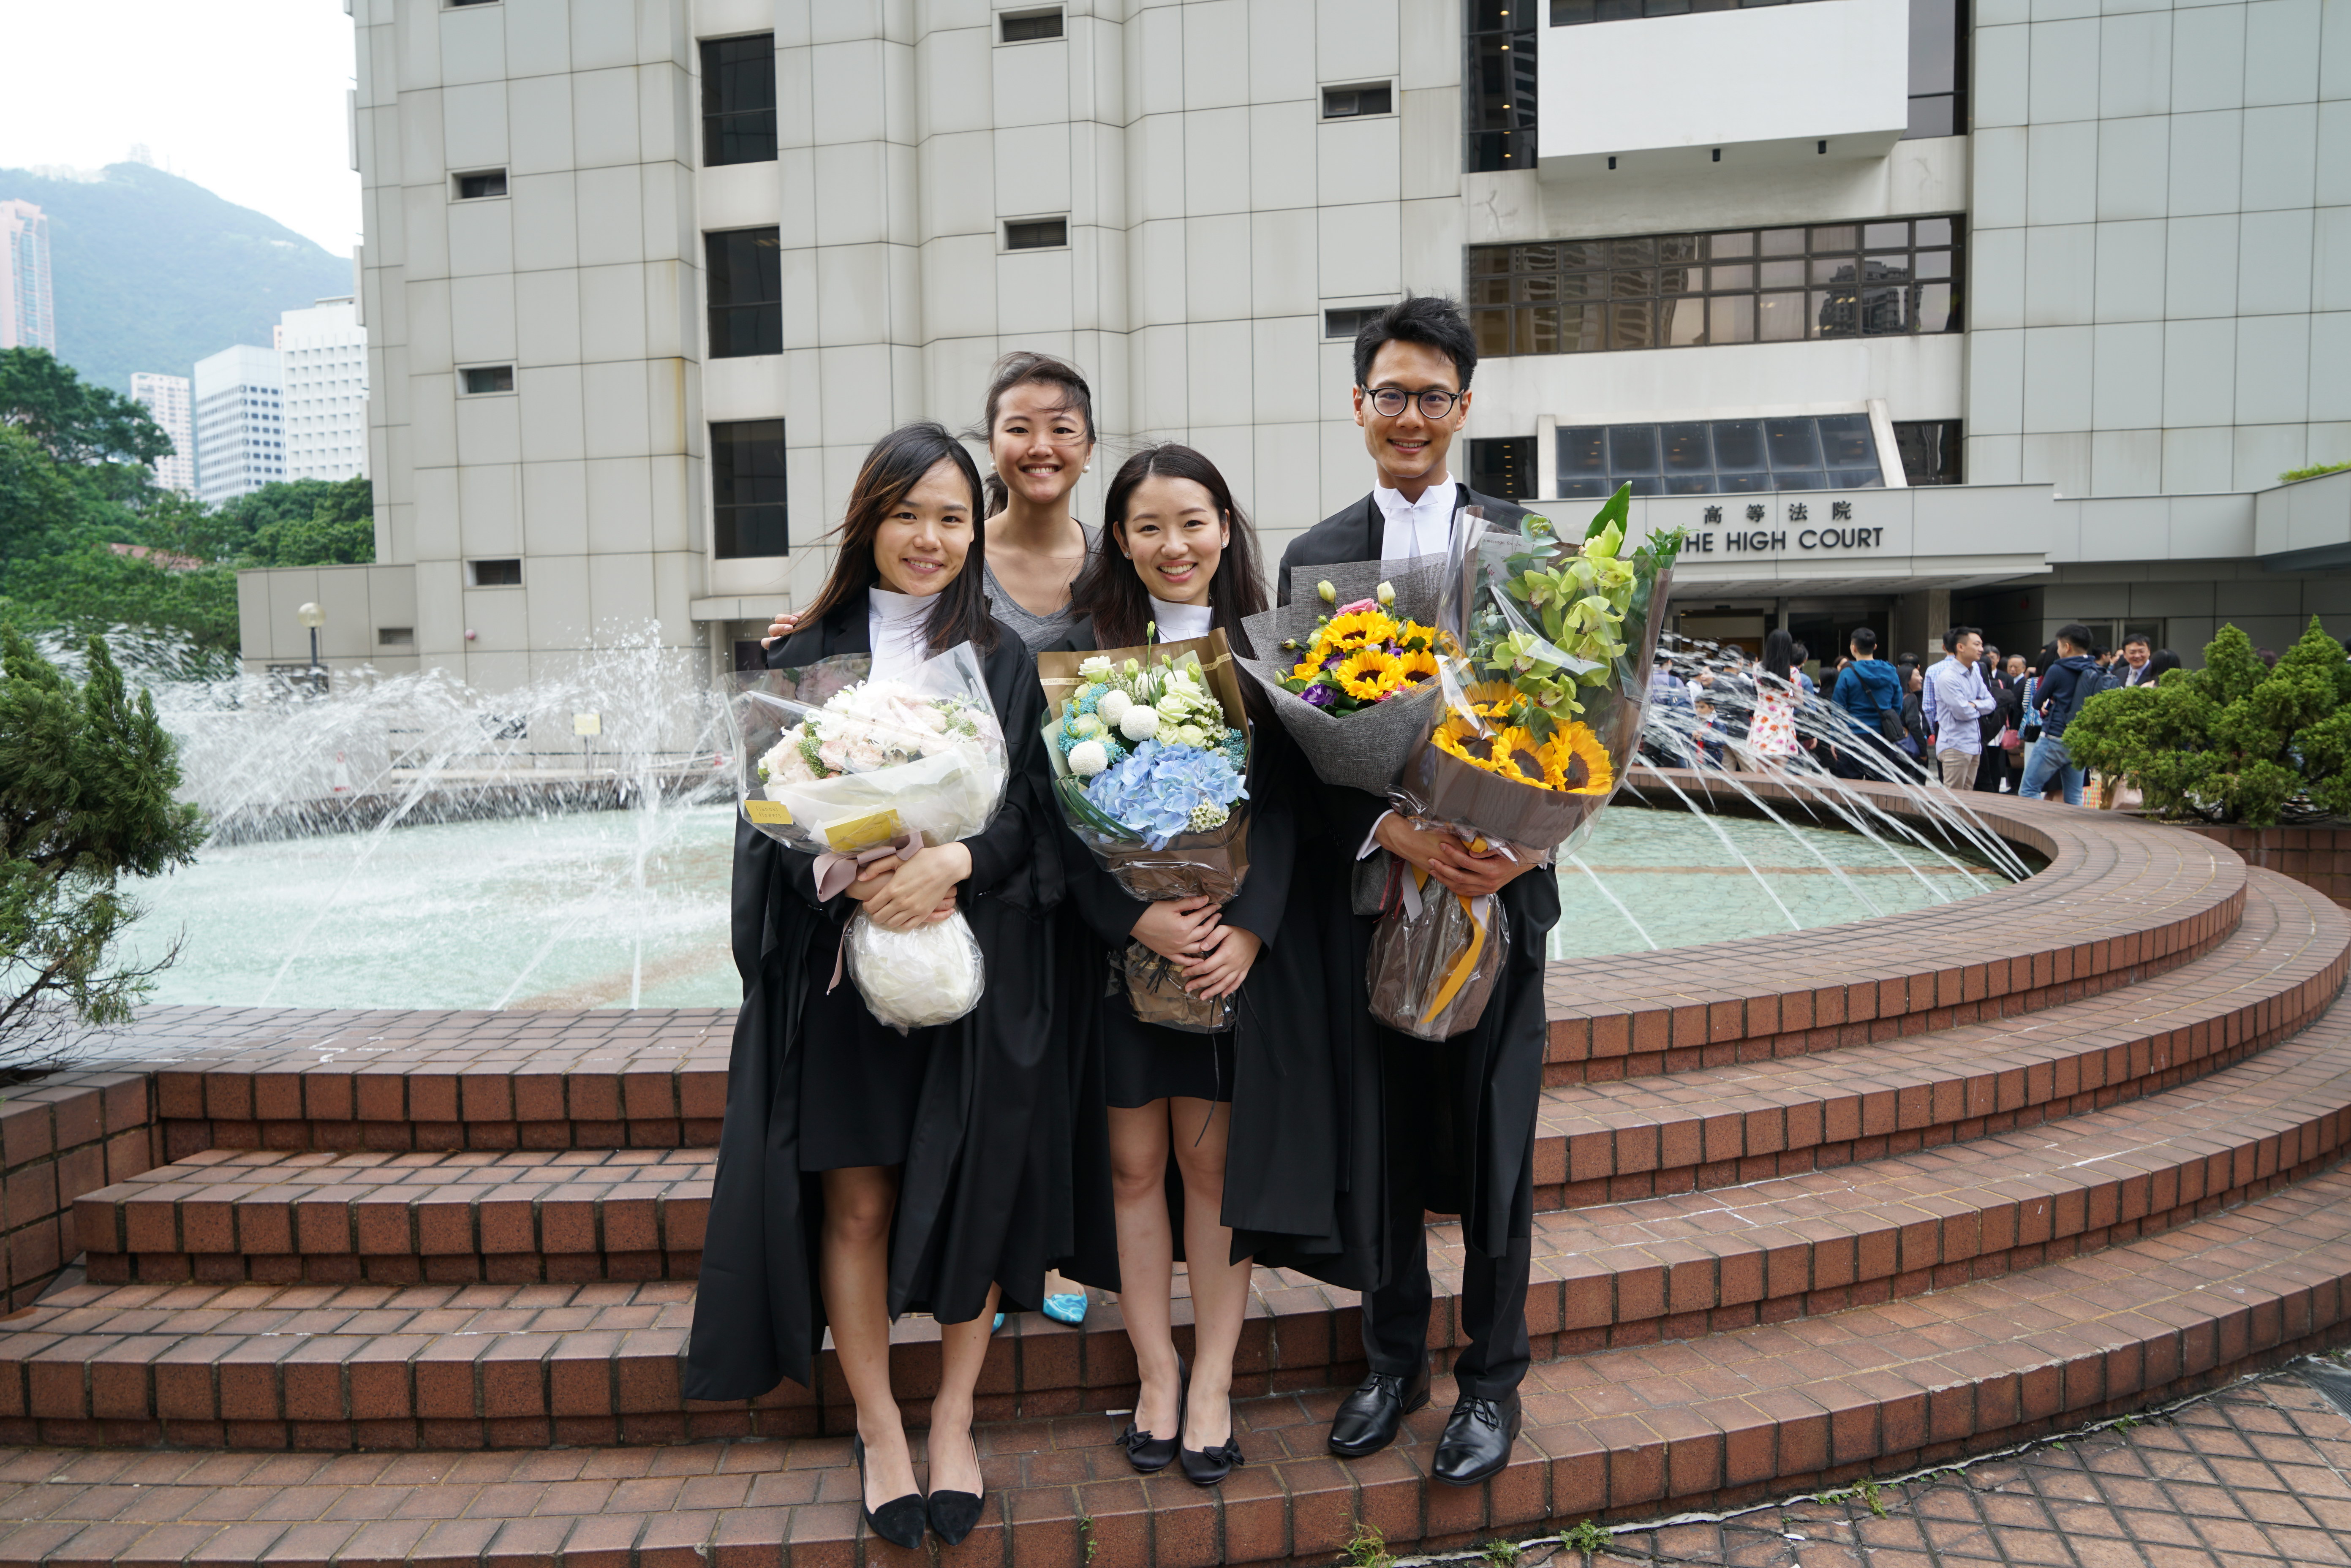 Admission of Ms Annie Chau, Mr Christopher Ho, Mr Marcus Lo, Ms Victoria Yeung and Ms Mily Yuen